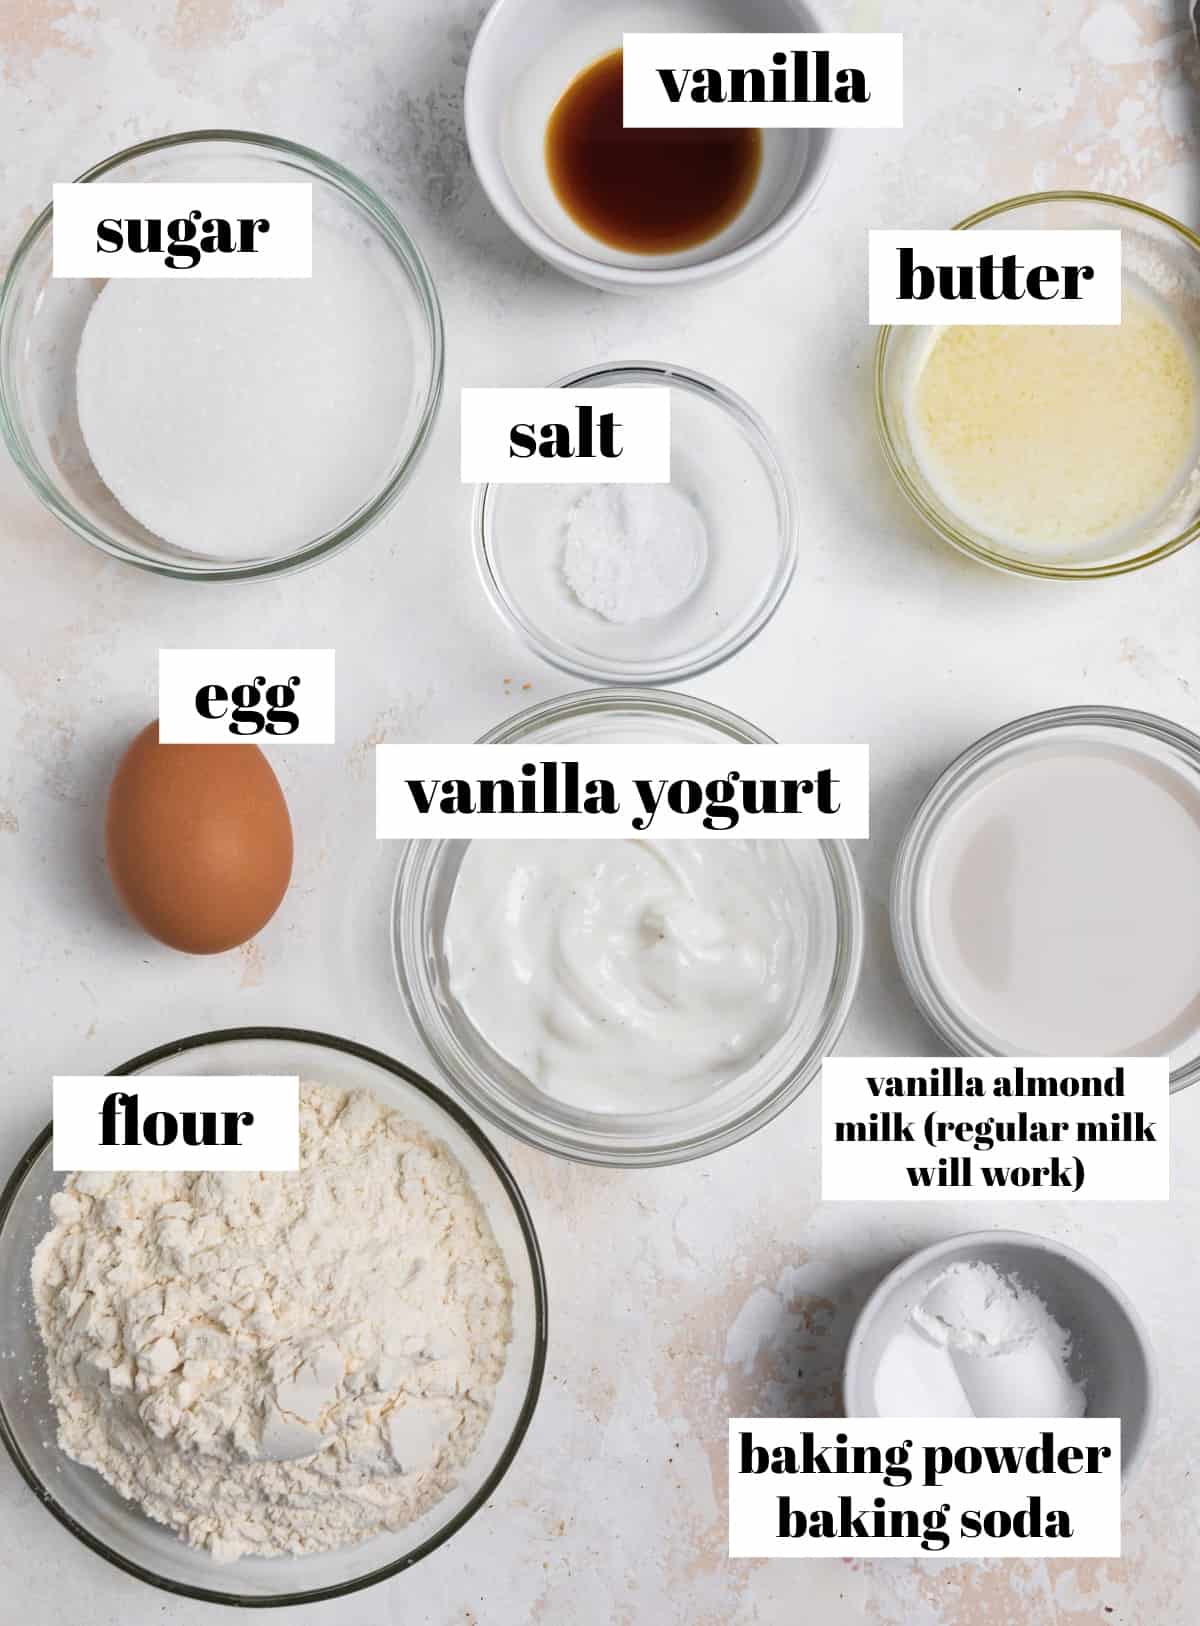 Flour, yogurt, baking powder, butter and other recipe ingredients labeled on a counter.